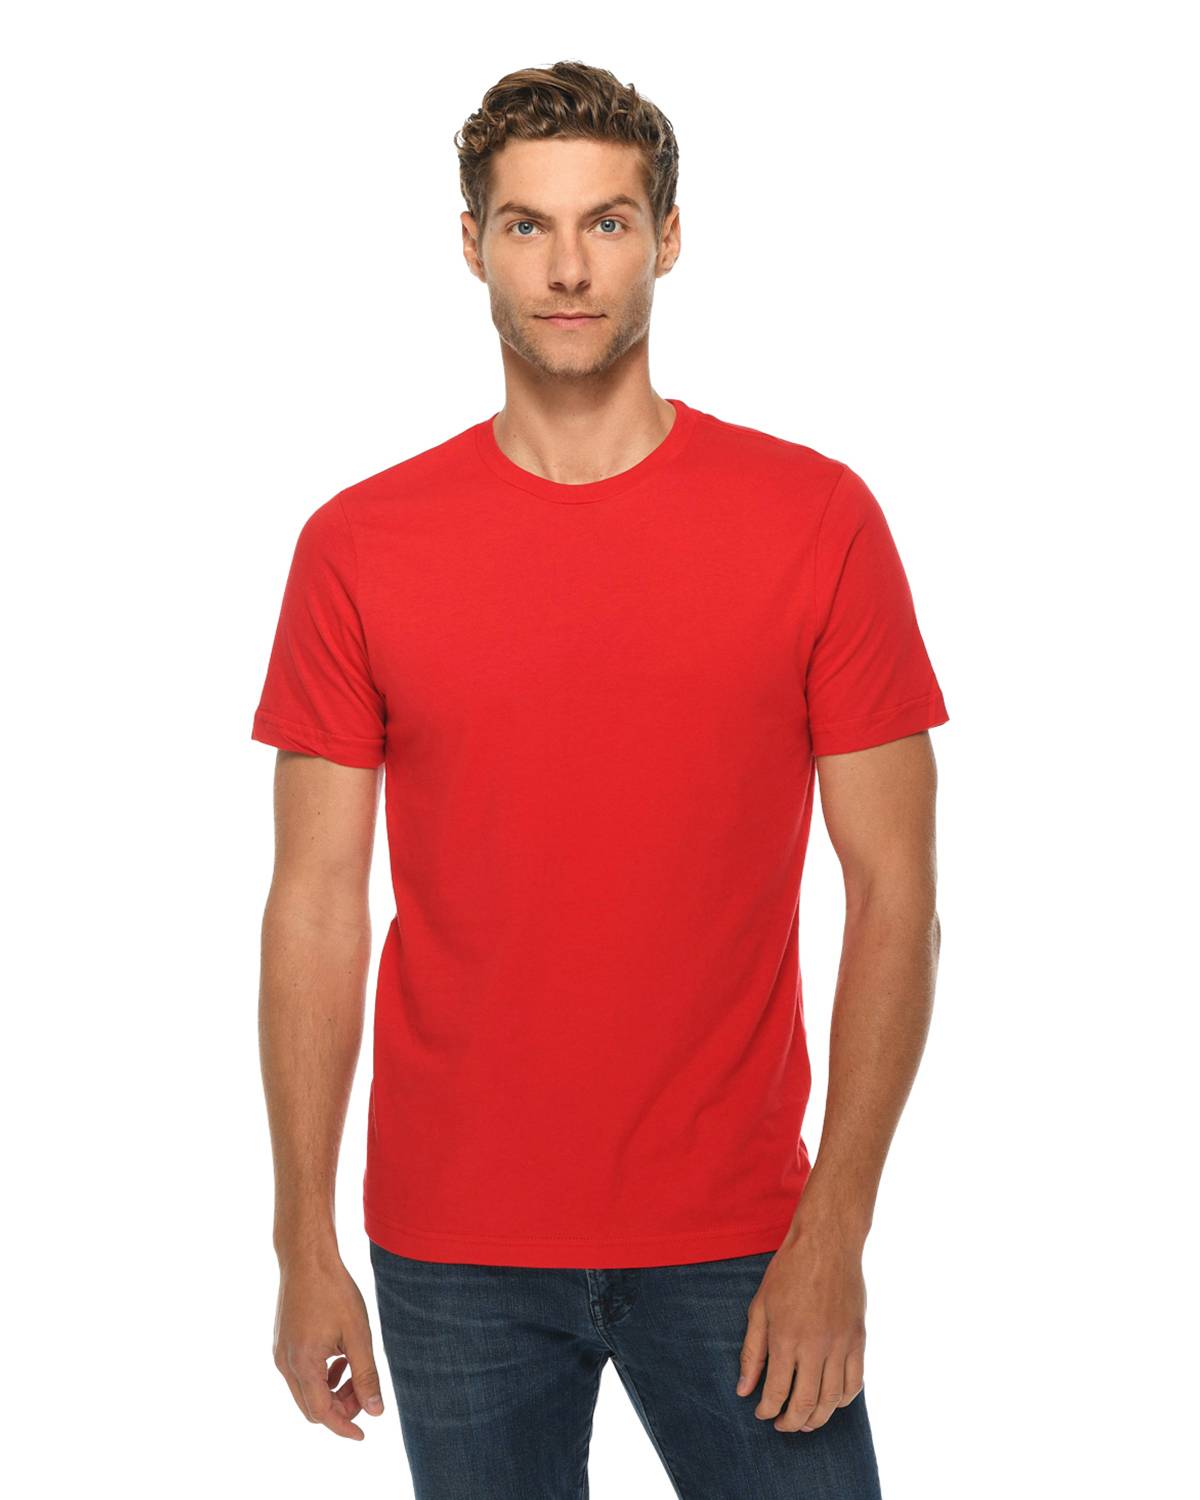 Lane Seven LS15000 Unisex Deluxe T-shirt - Free Shipping Available